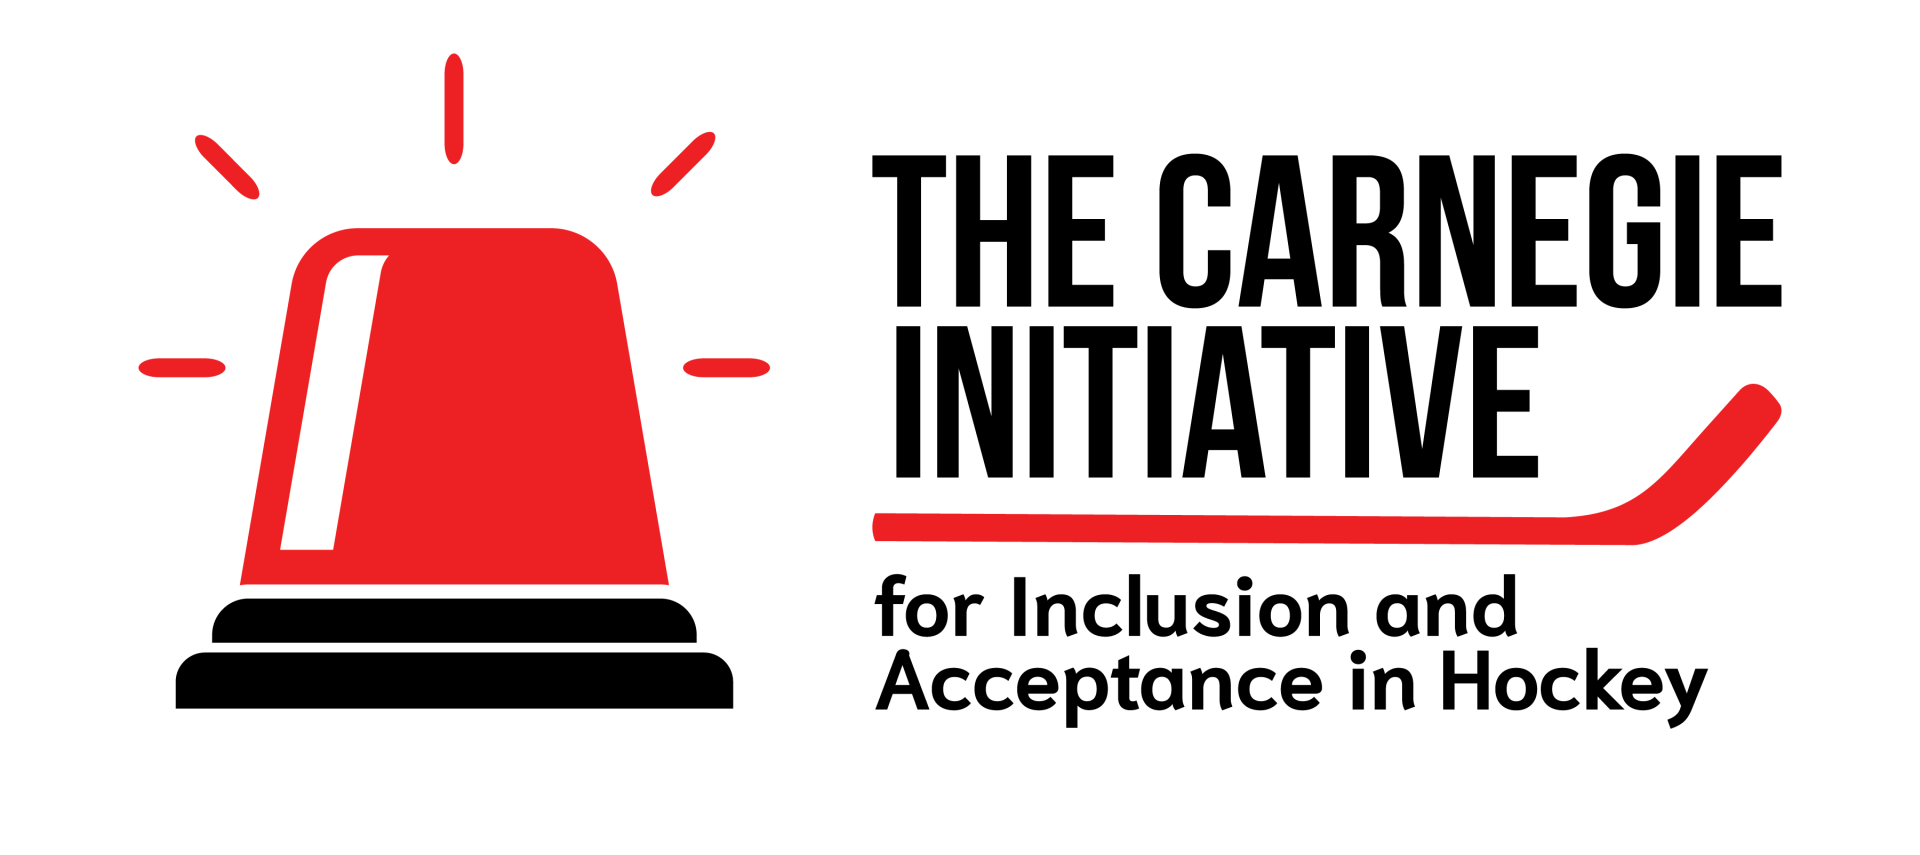 The Carnegie Initiative for Inclusion and Acceptance in Hockey